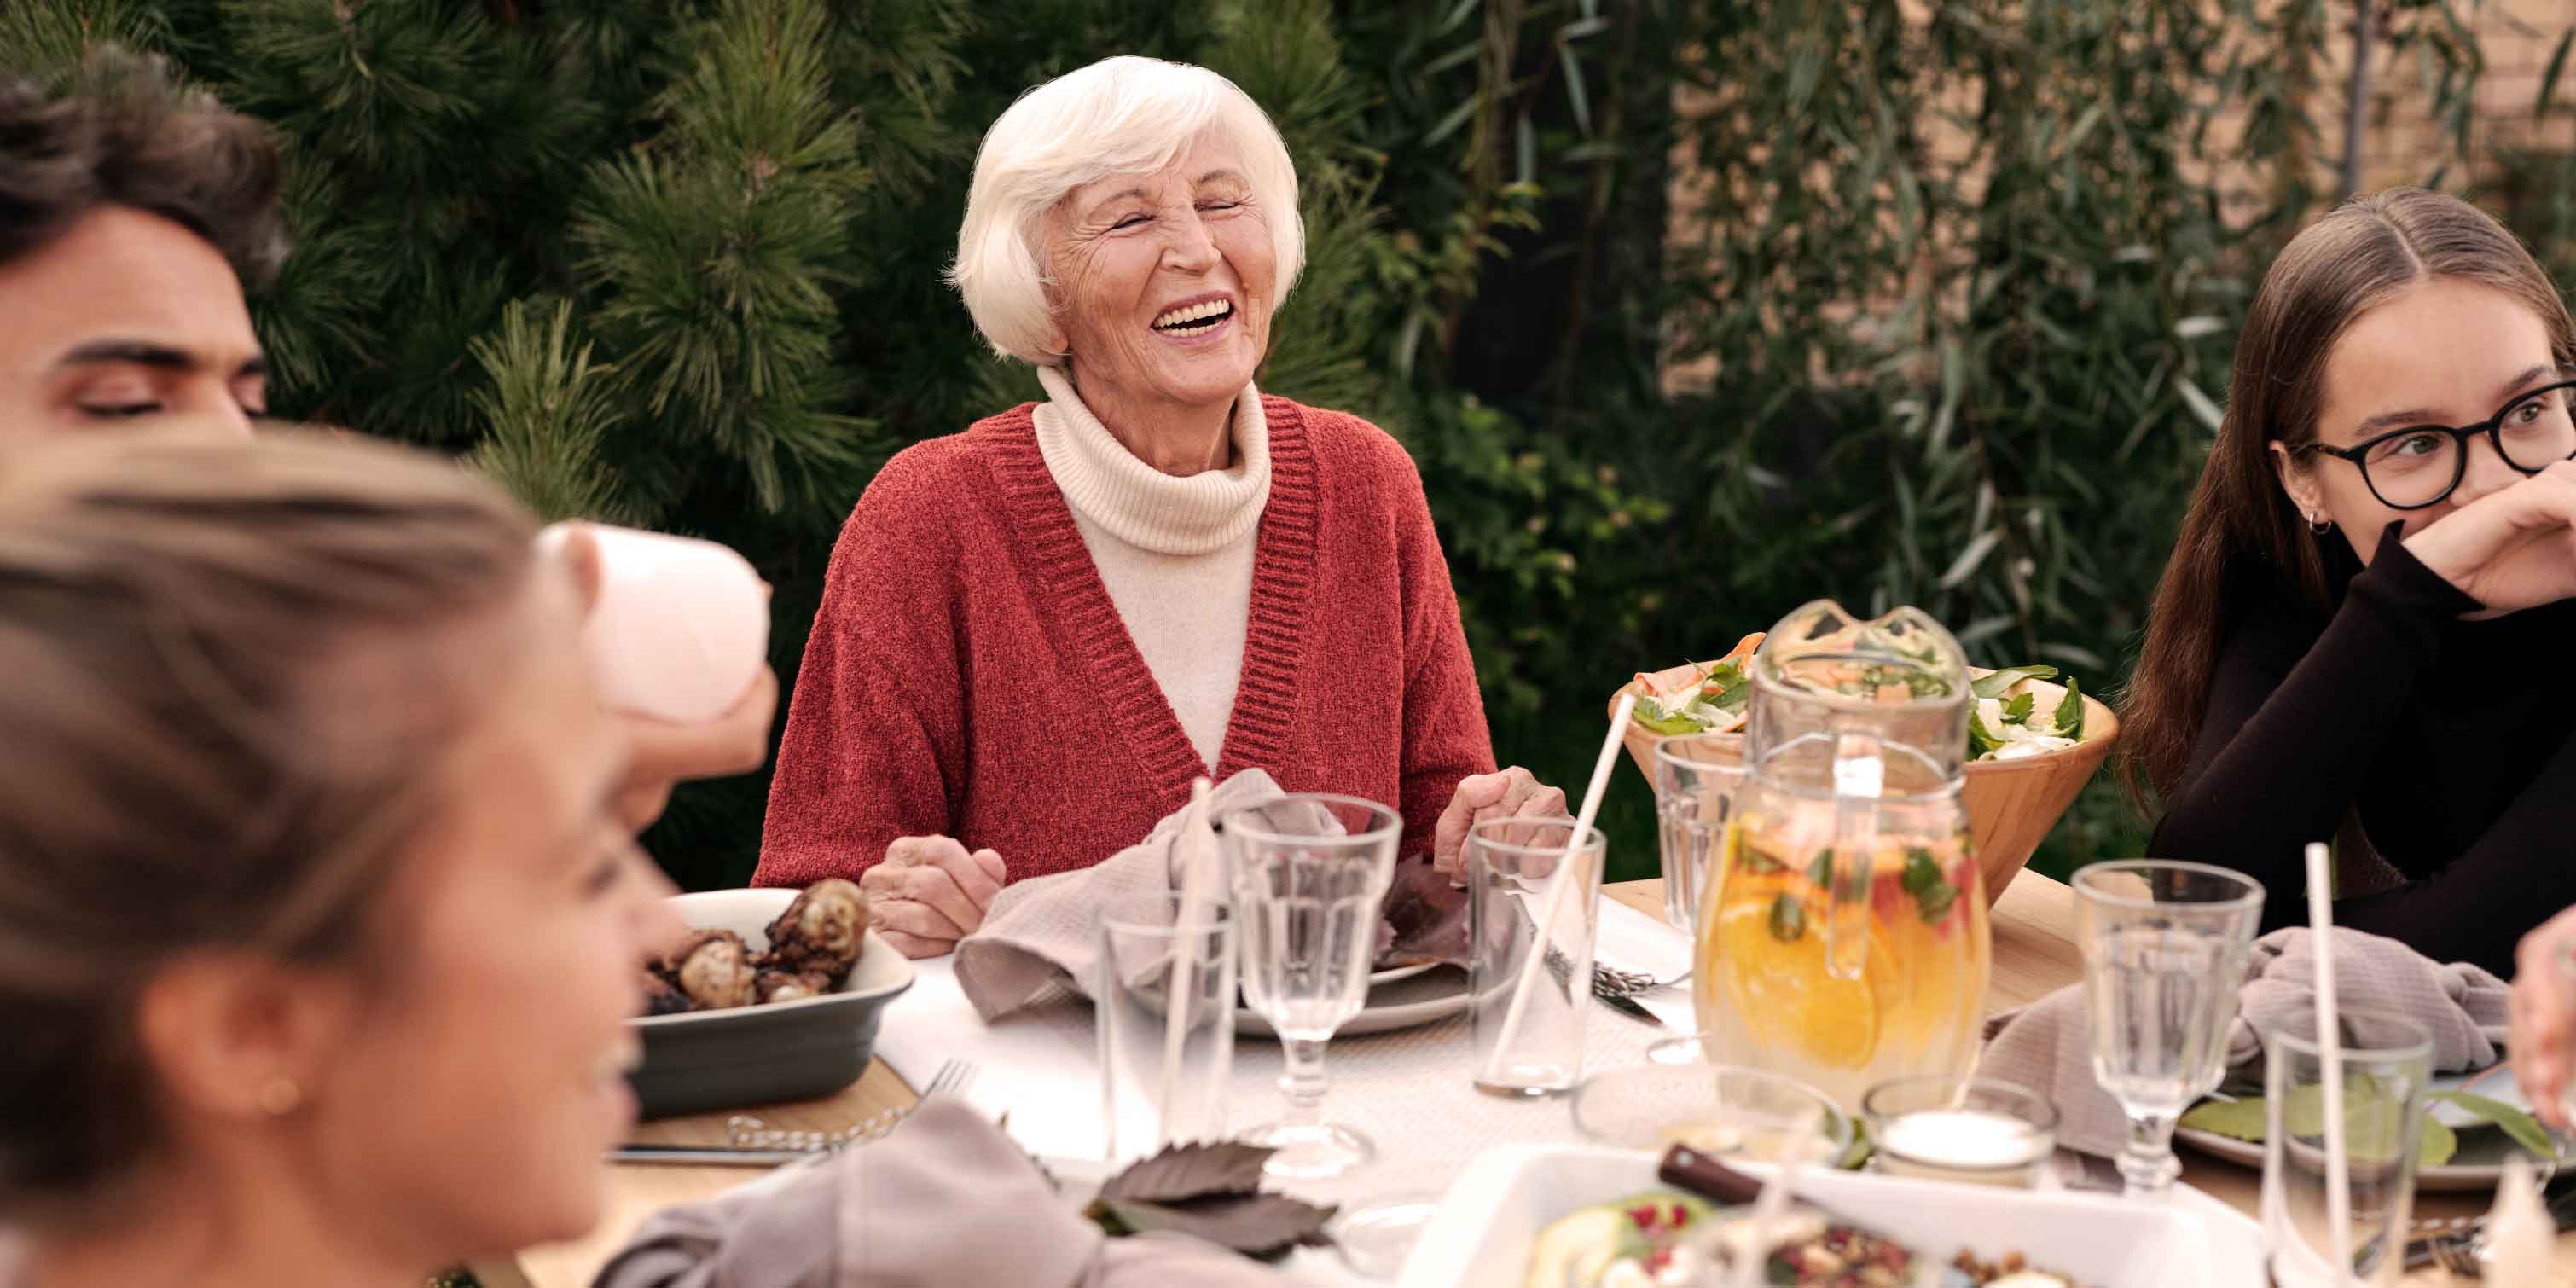 An elderly person at a dinner table laughing together with three younger people.